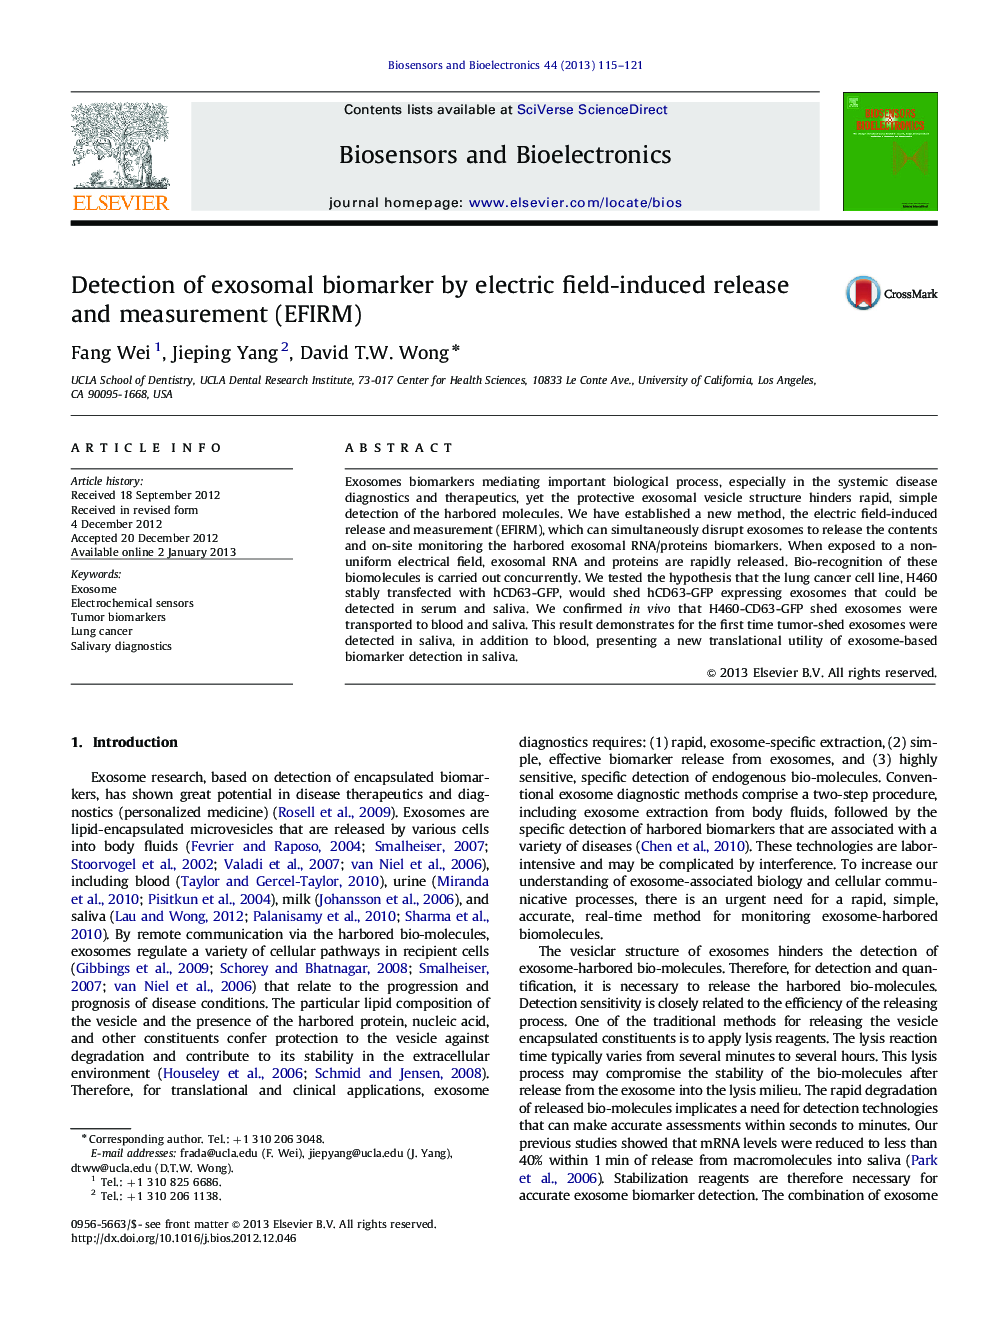 Detection of exosomal biomarker by electric field-induced release and measurement (EFIRM)